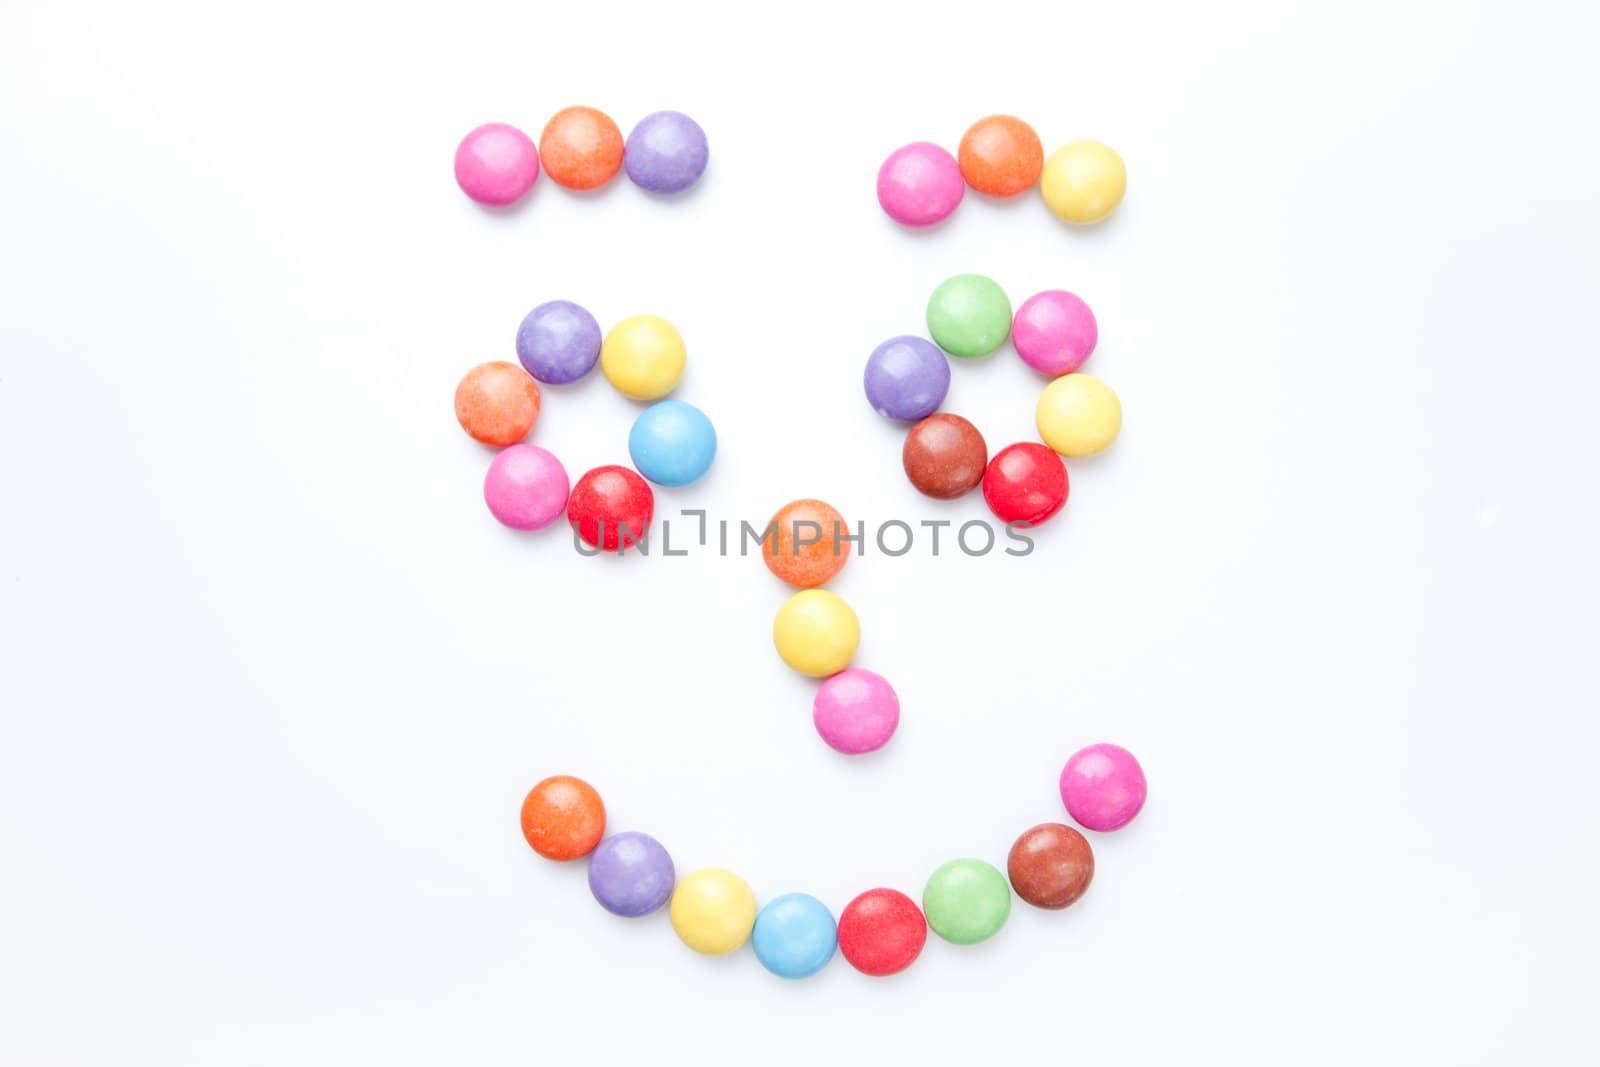 Face of candies against a white background